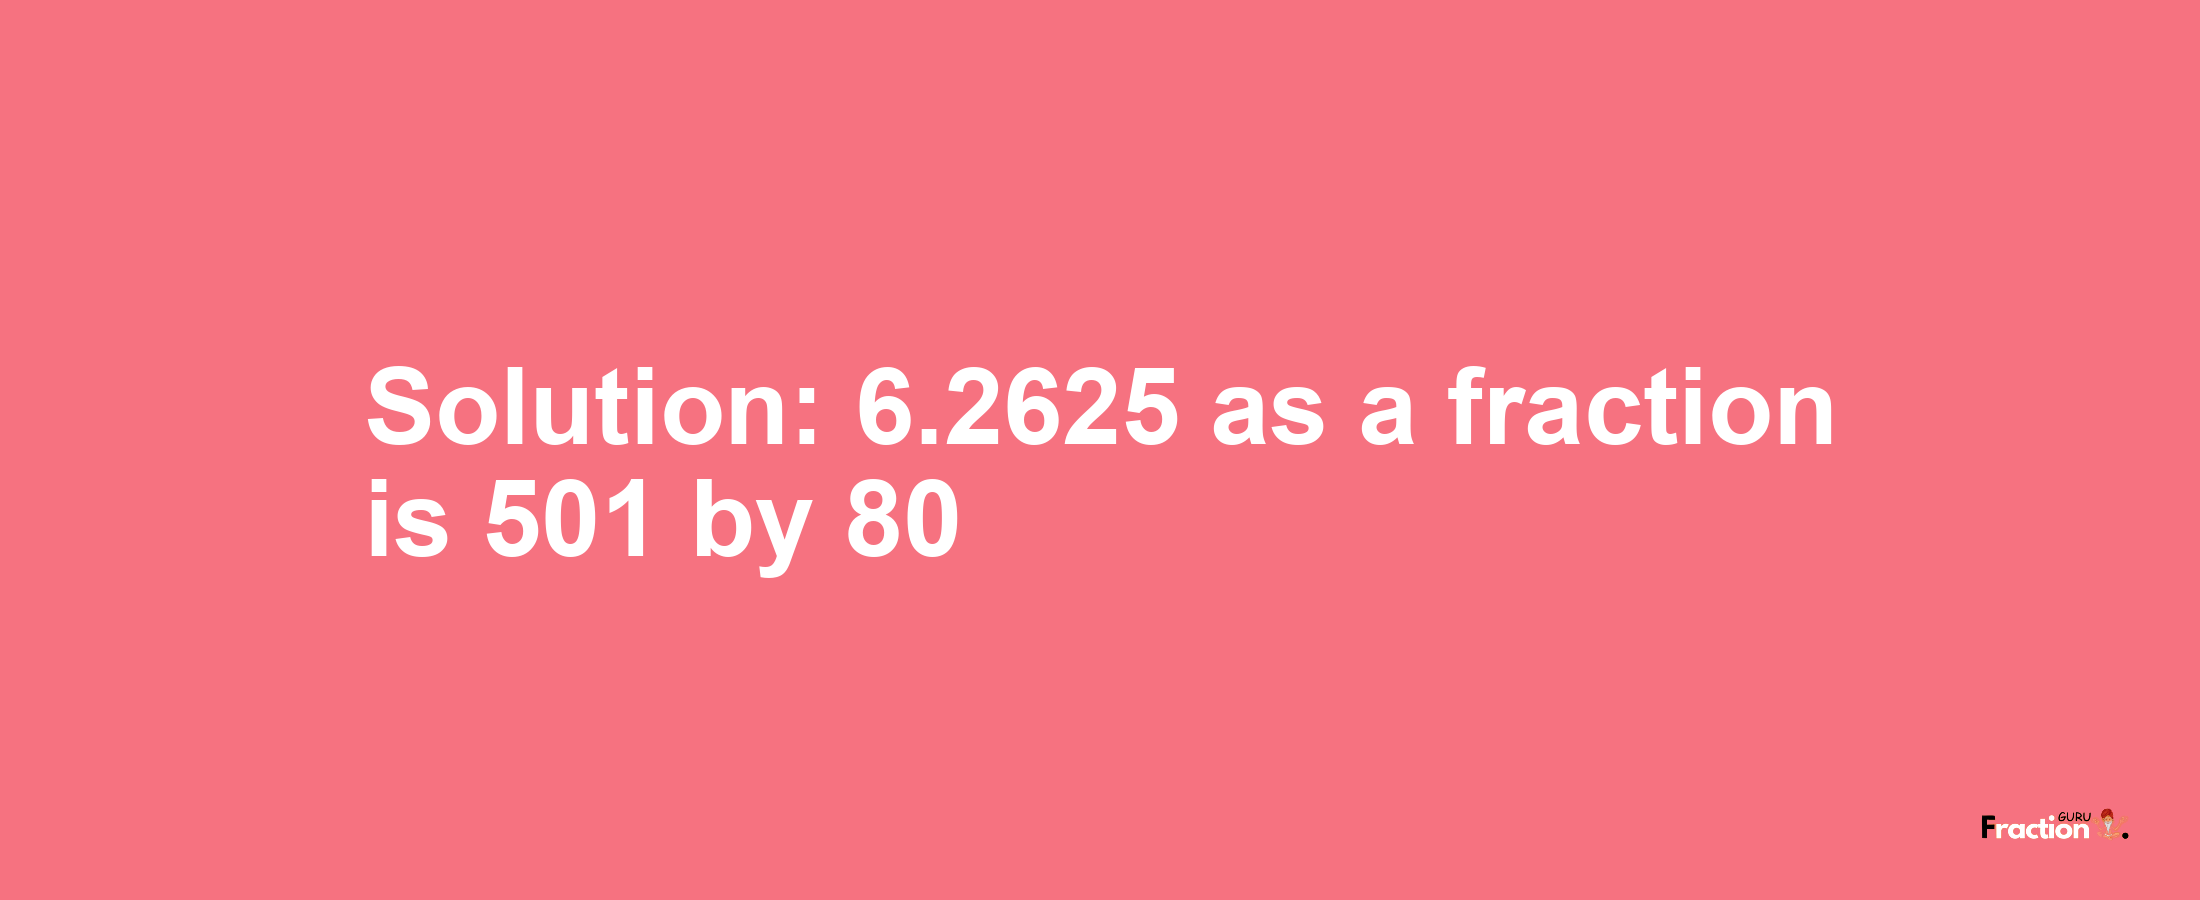 Solution:6.2625 as a fraction is 501/80